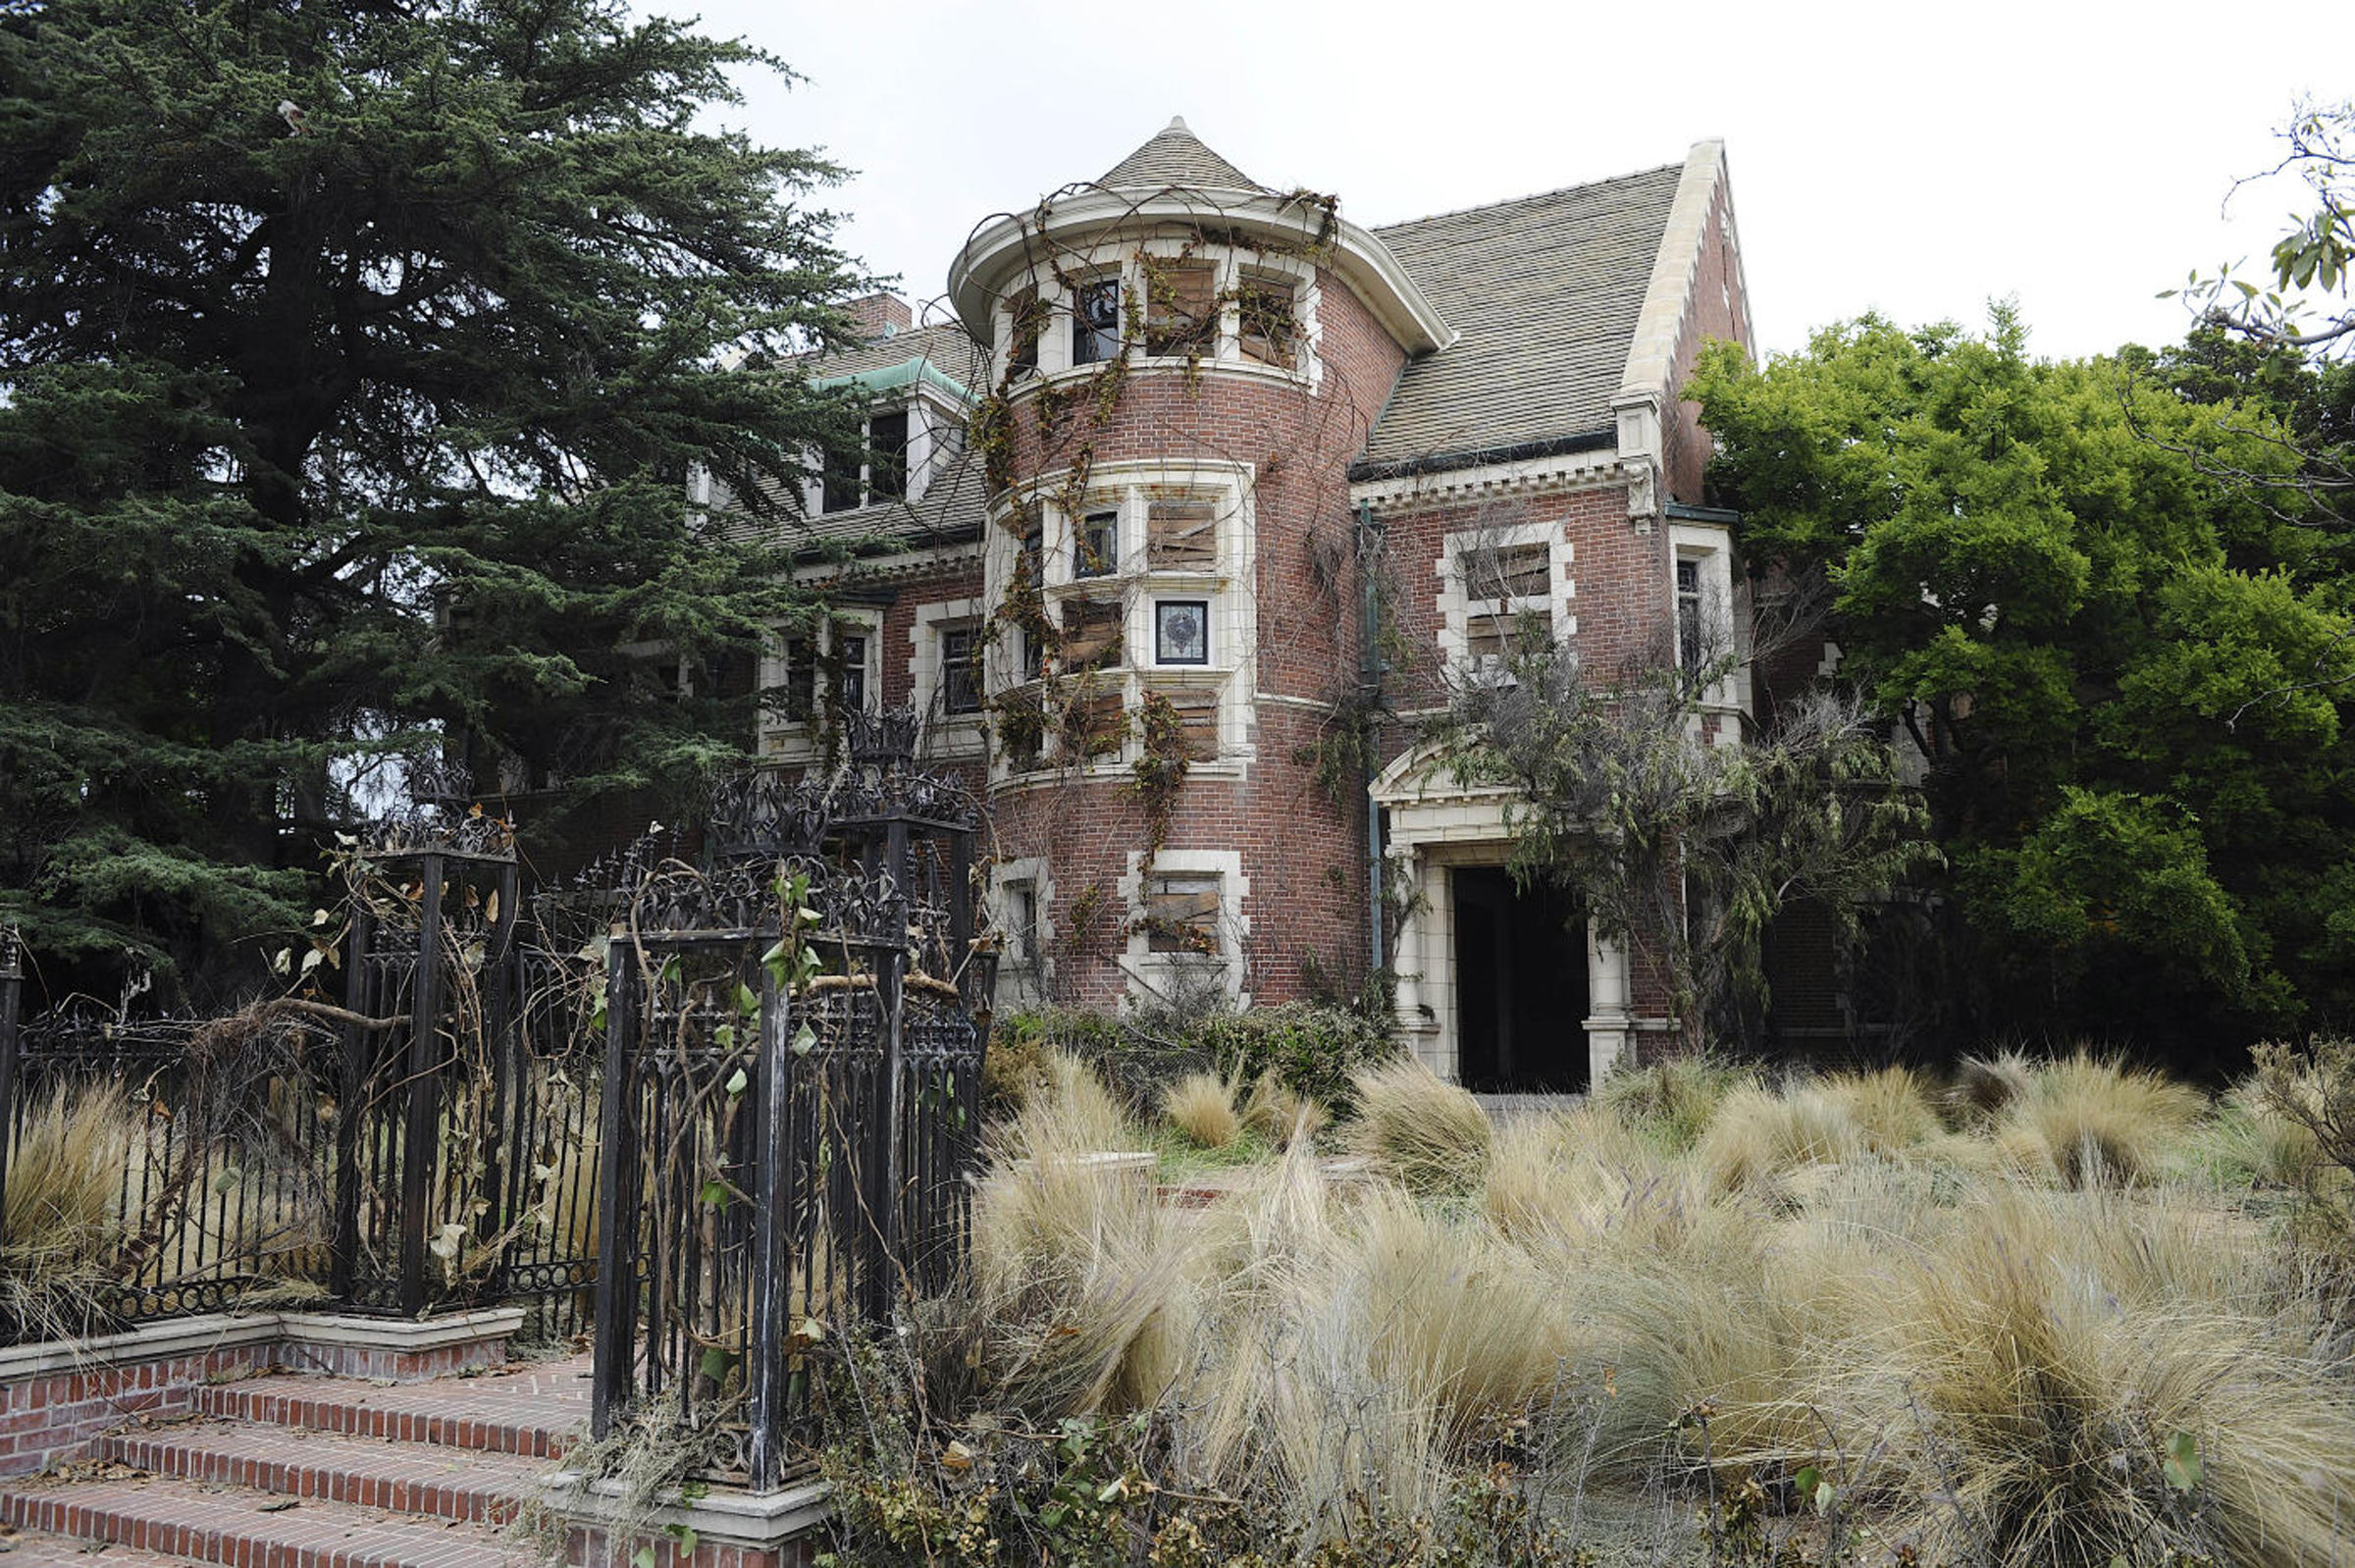 Buyers of $3.2M 'Murder House' Haunted by 'American Horror Story' Fans, Lawsuit Says